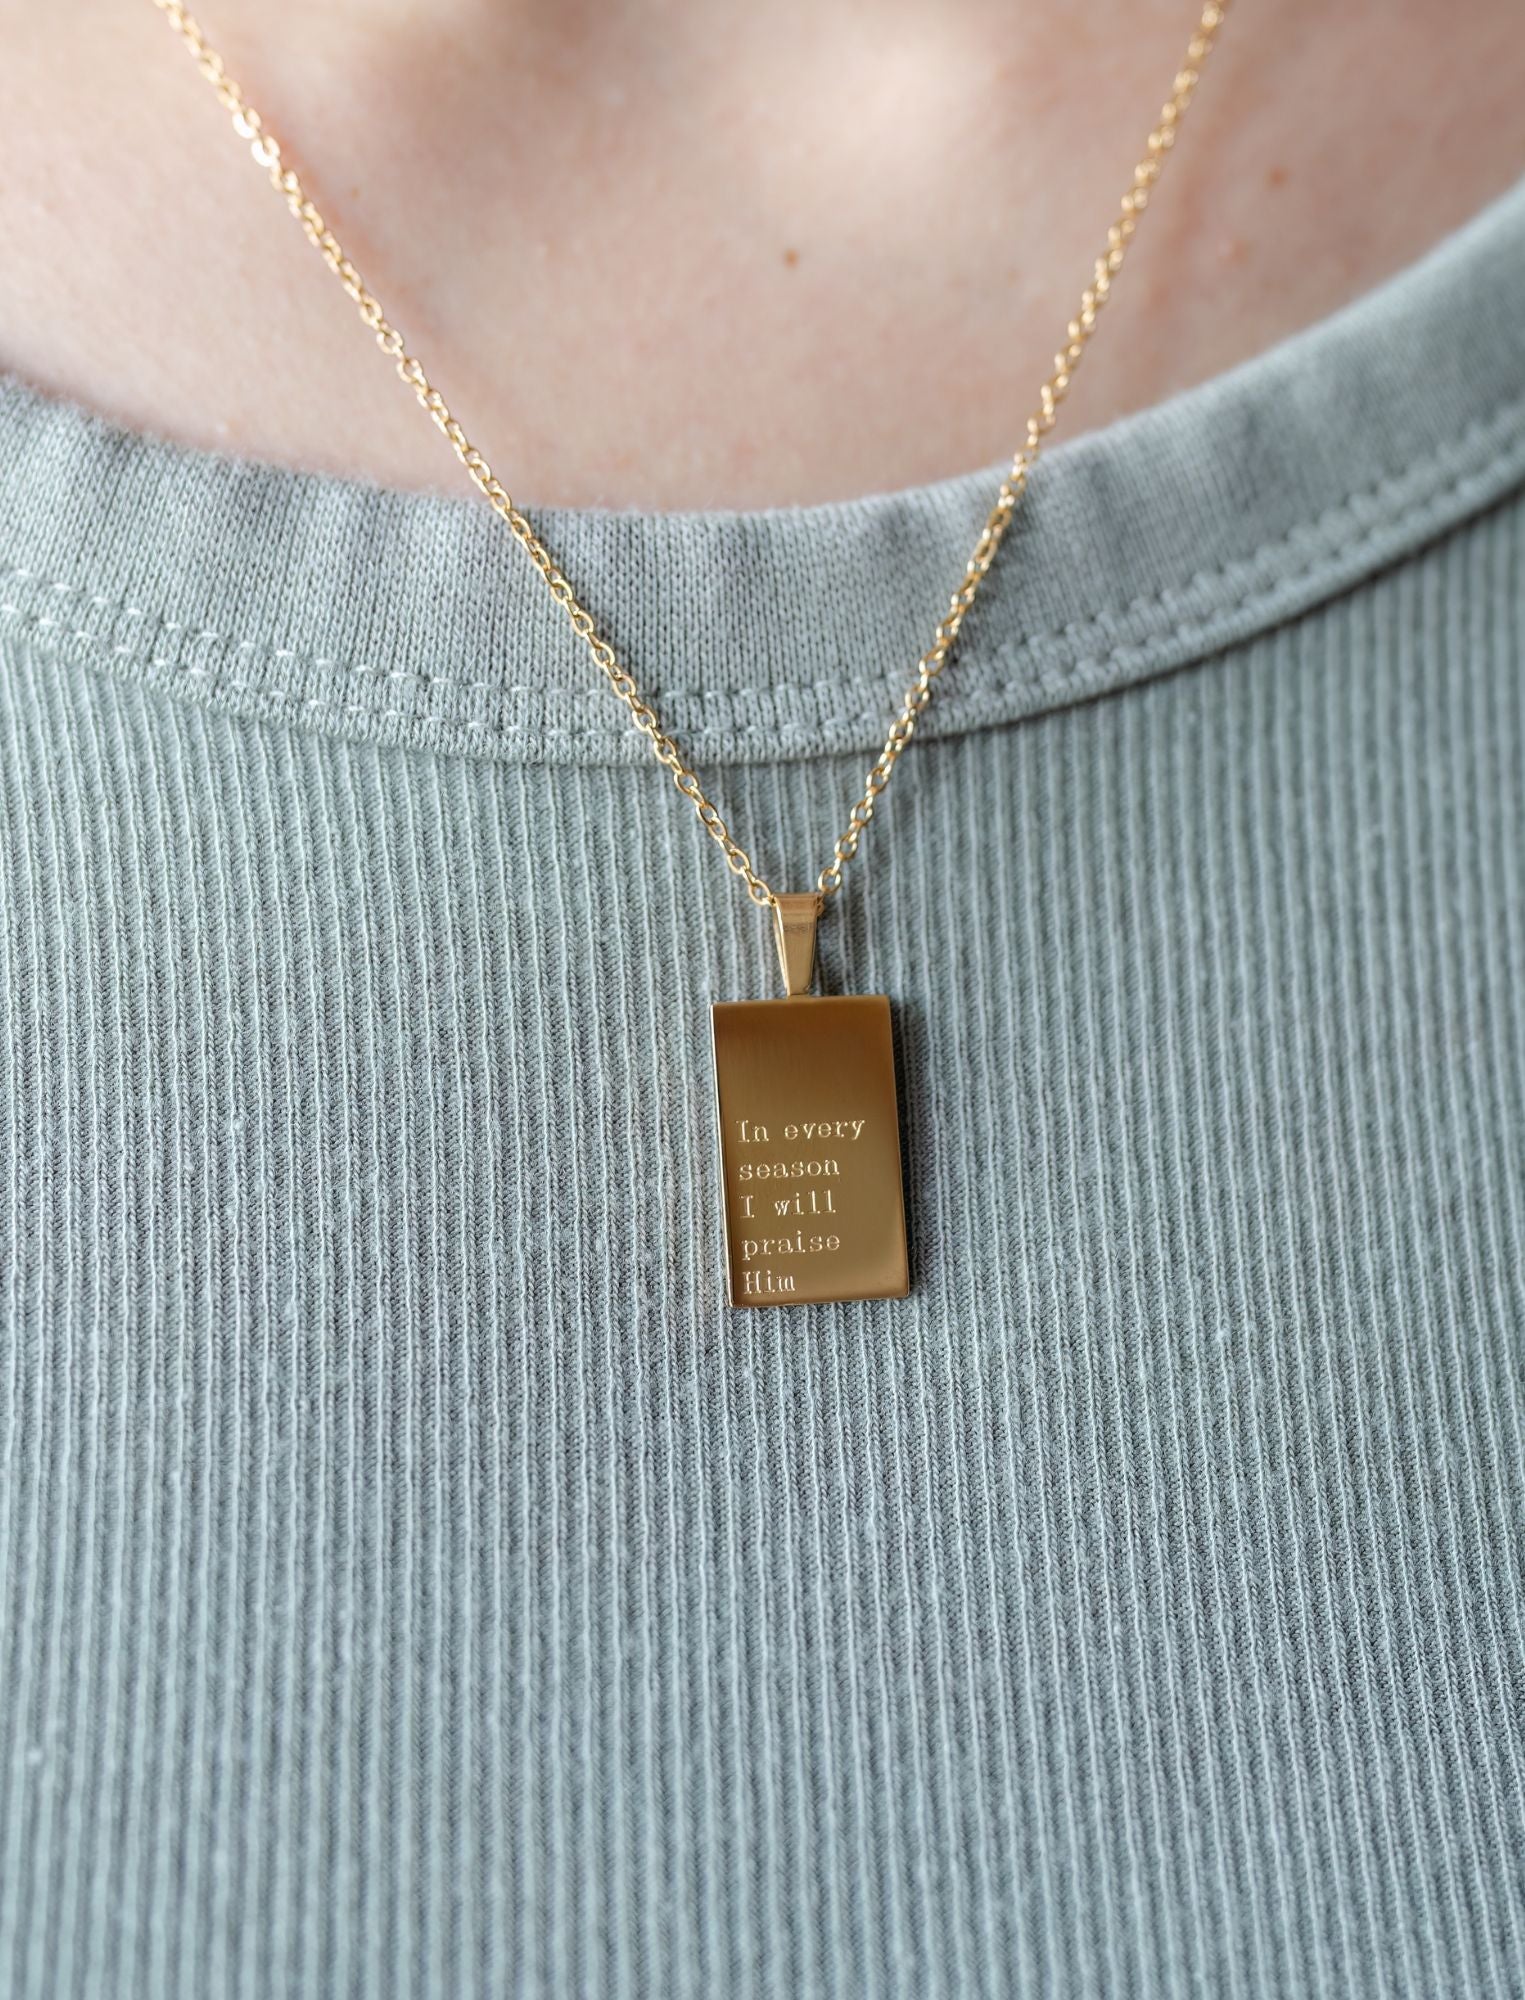 Necklace: 18kt Gold In every season I will Praise